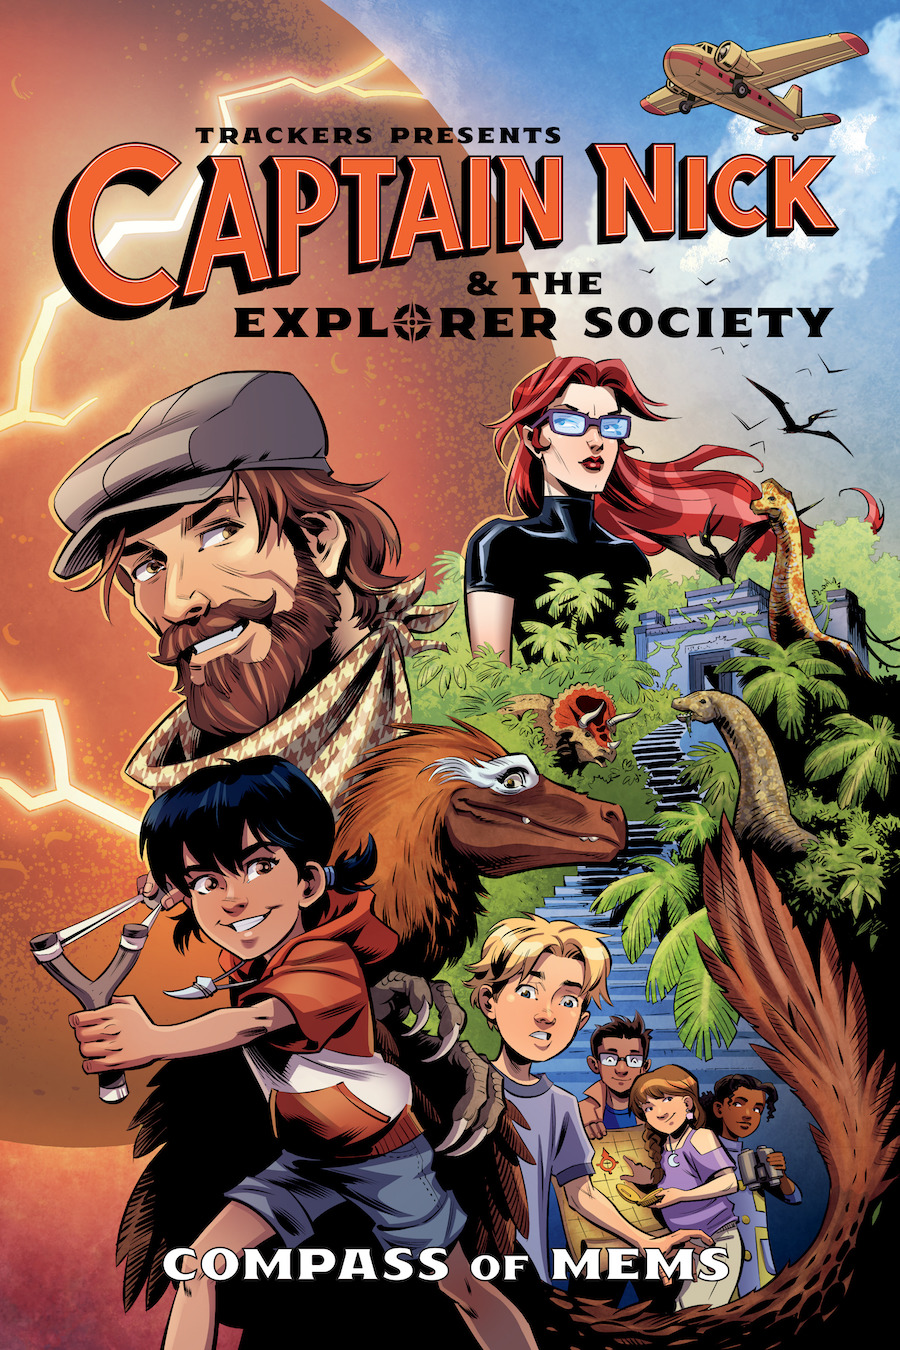 Cover of Trackers Presents: Captain Nick & the Explorer Society, showing a bearded man, a woman in glasses, several children, dinosaurs, an airplane, an ancient temple, and a map.